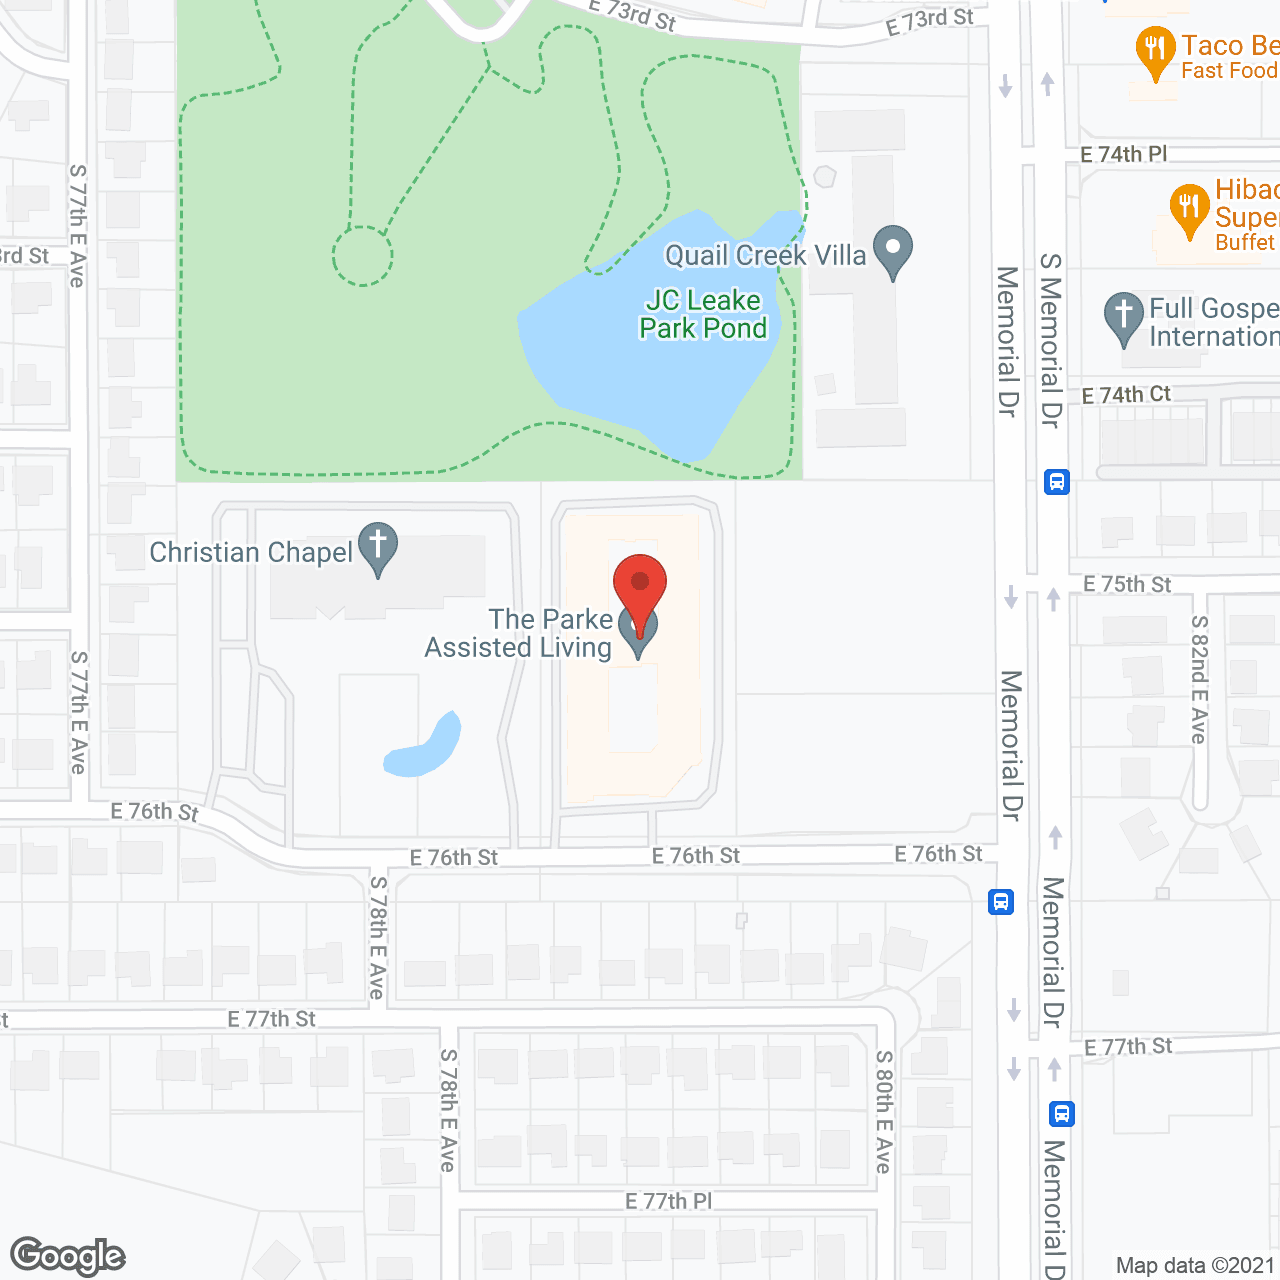 The Parke Assisted Living in google map